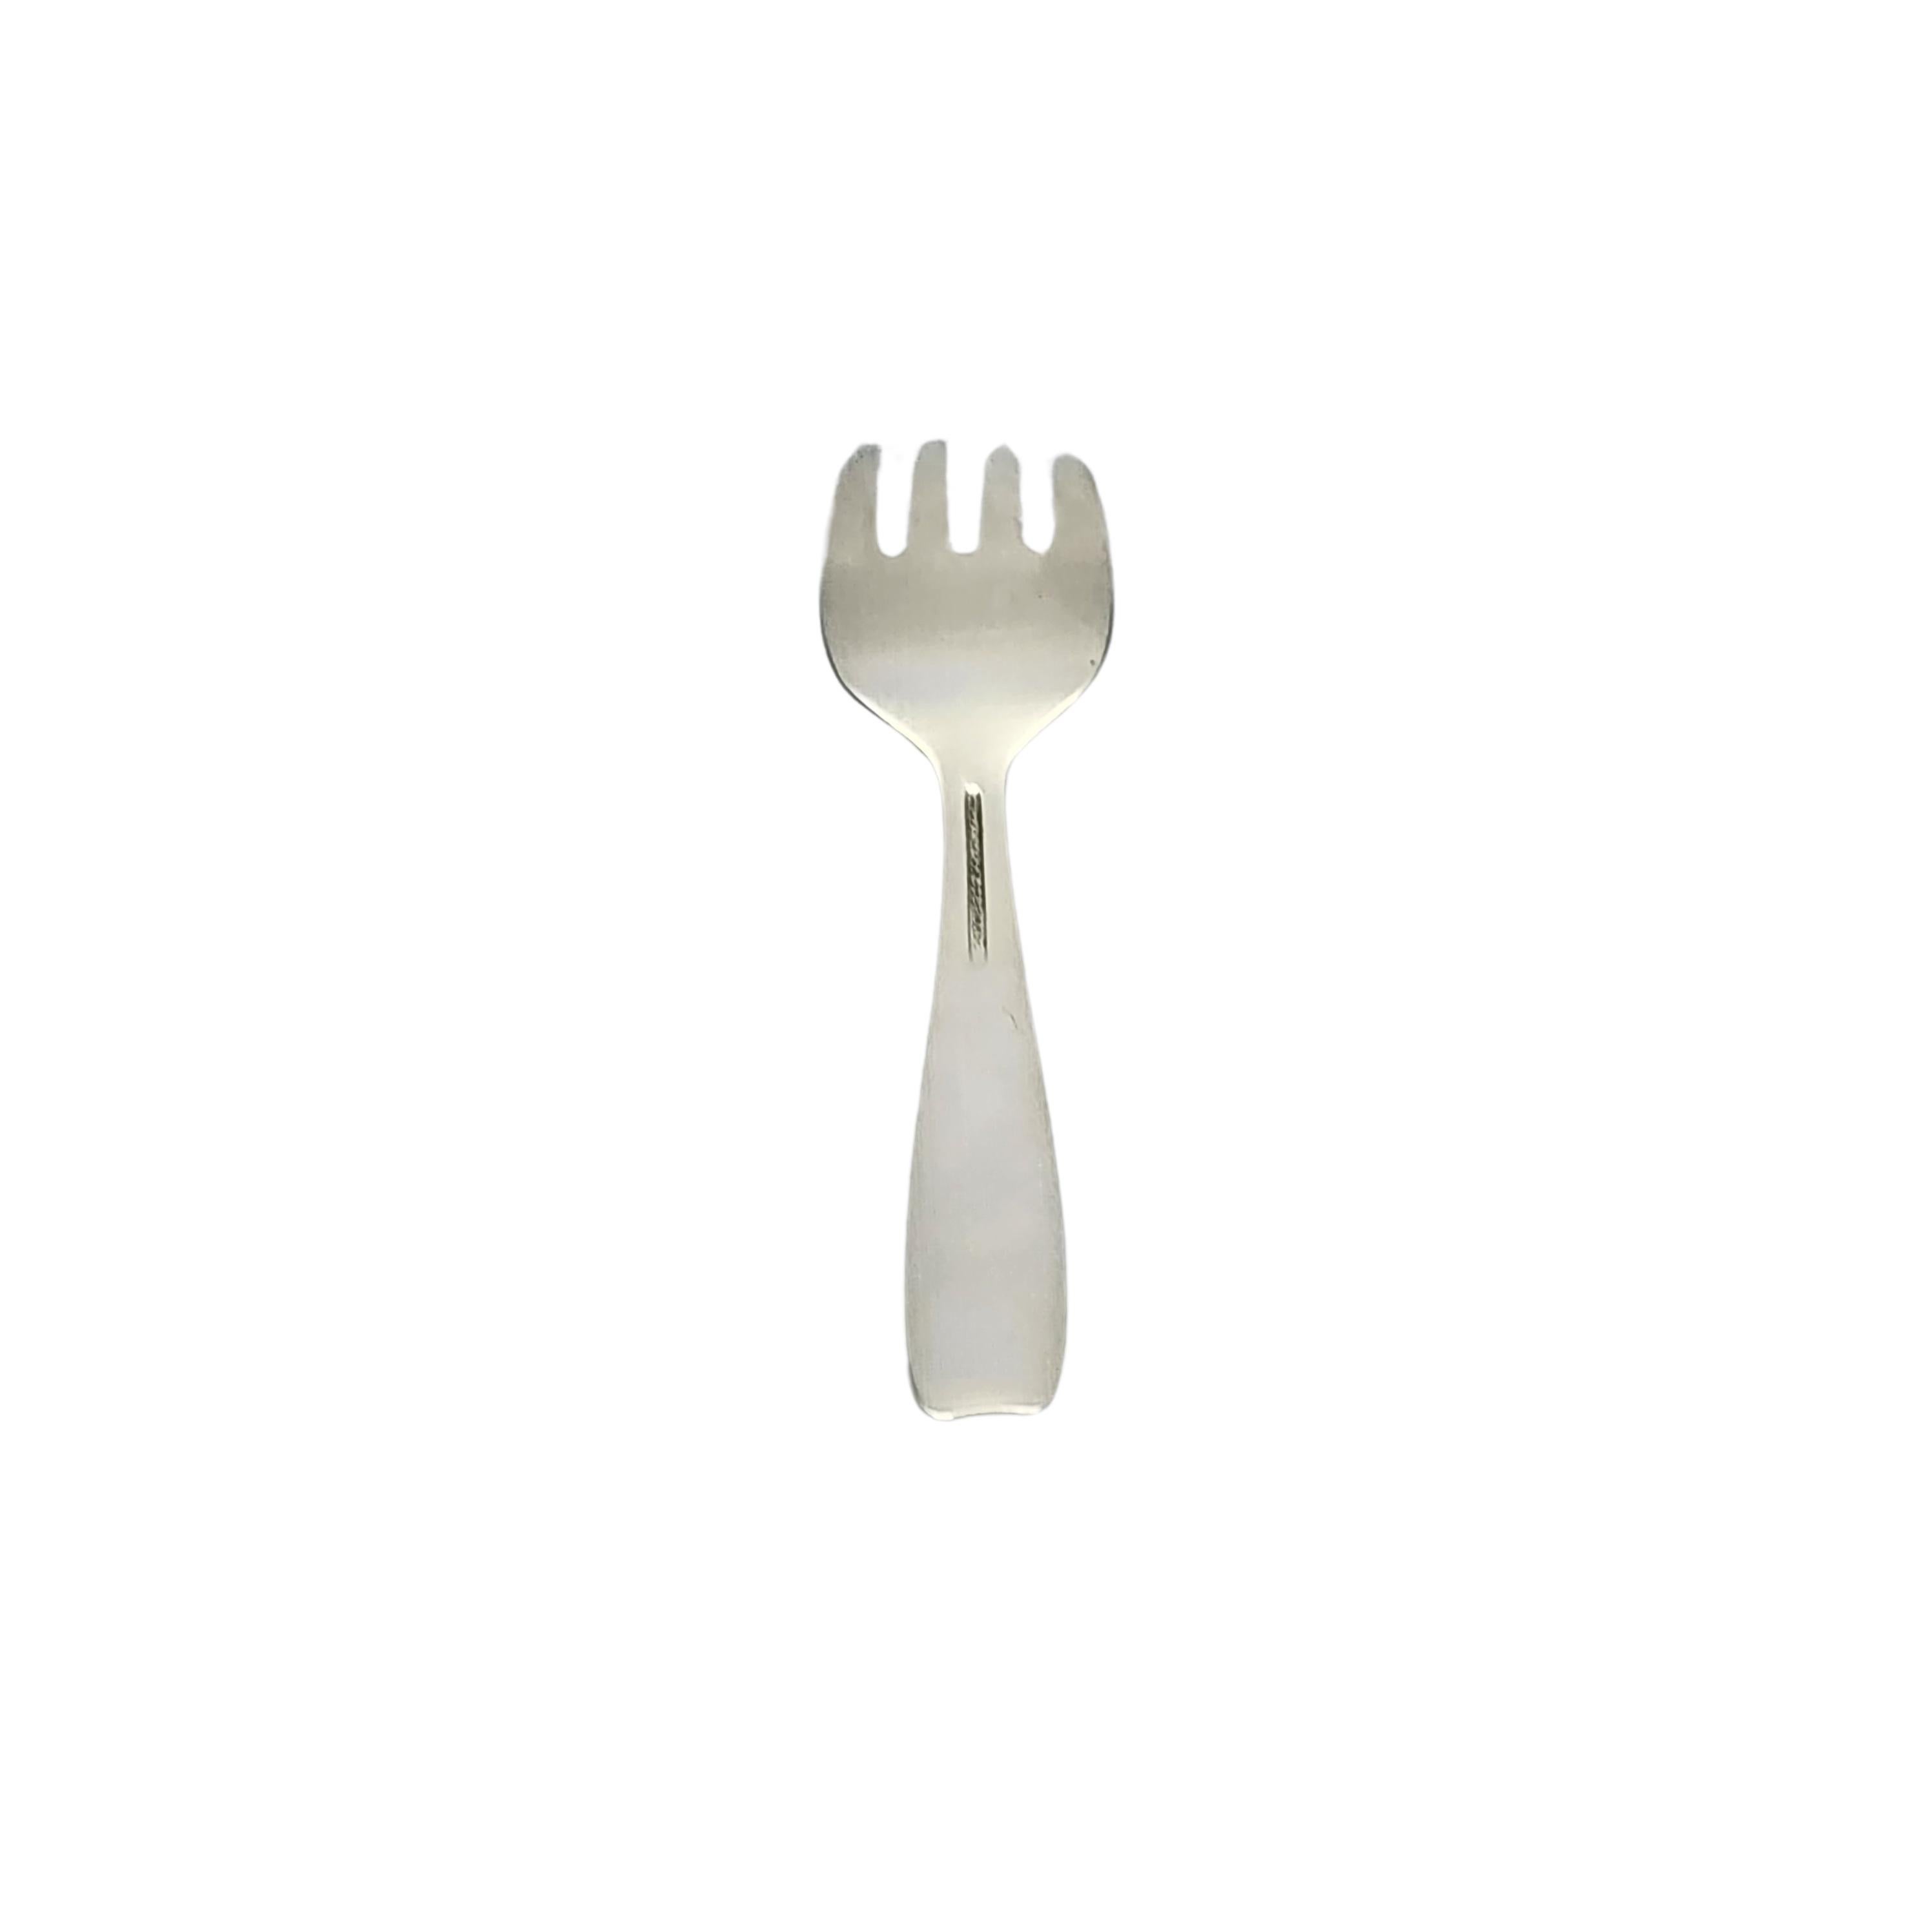 Tiffany & Co sterling silver child/baby feeding fork in the Cordis pattern.

No monogram or engraving

A small fork in the Cordis pattern, a simple and classic design. Hallmarks date this piece to manufacture under the directorship of John C. Moore